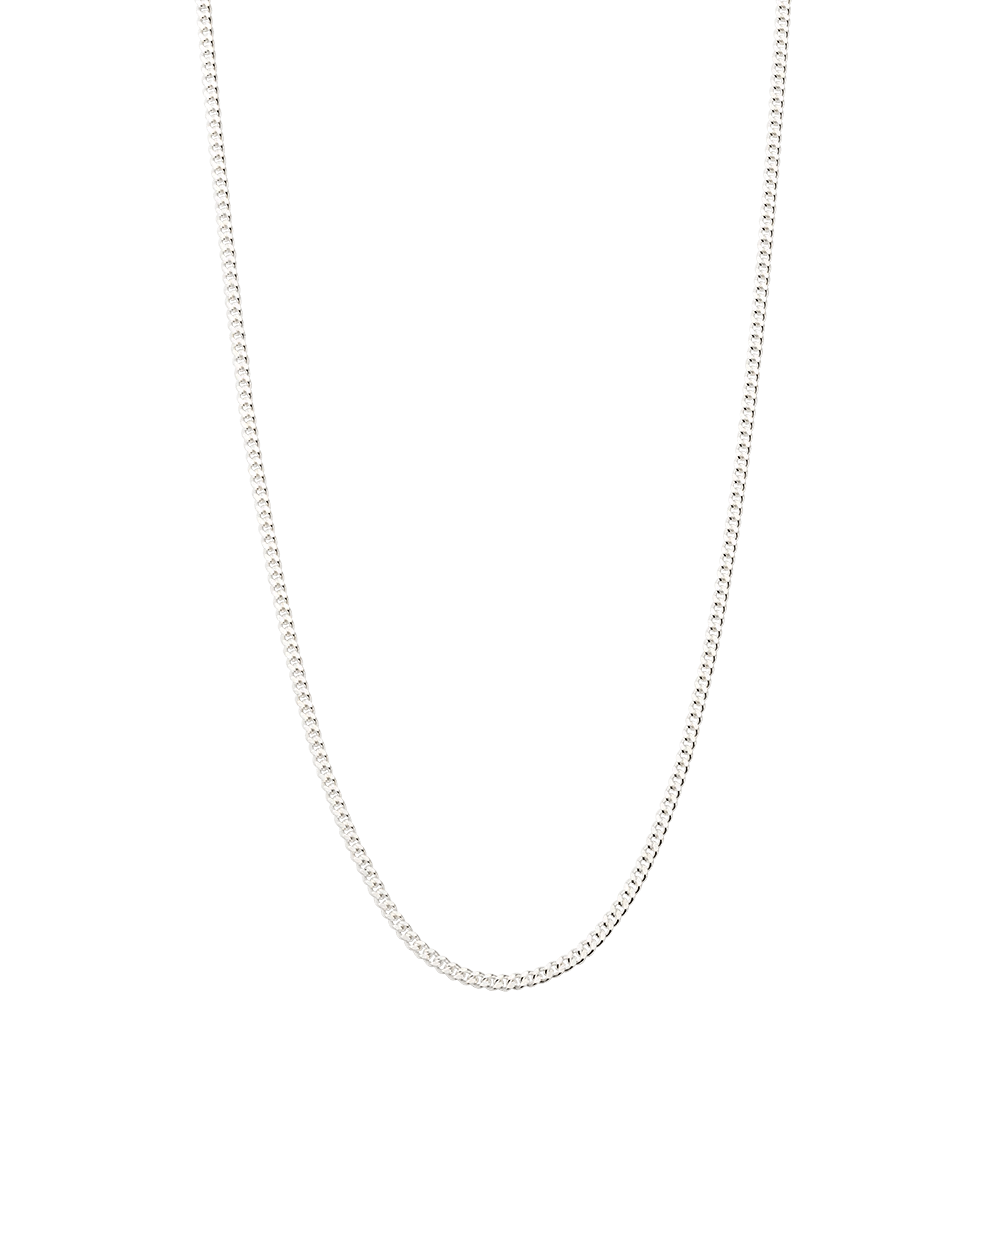 Kirstin Ash Necklaces Kirstin Ash Curb Chain 16-18'' Sterling Silver